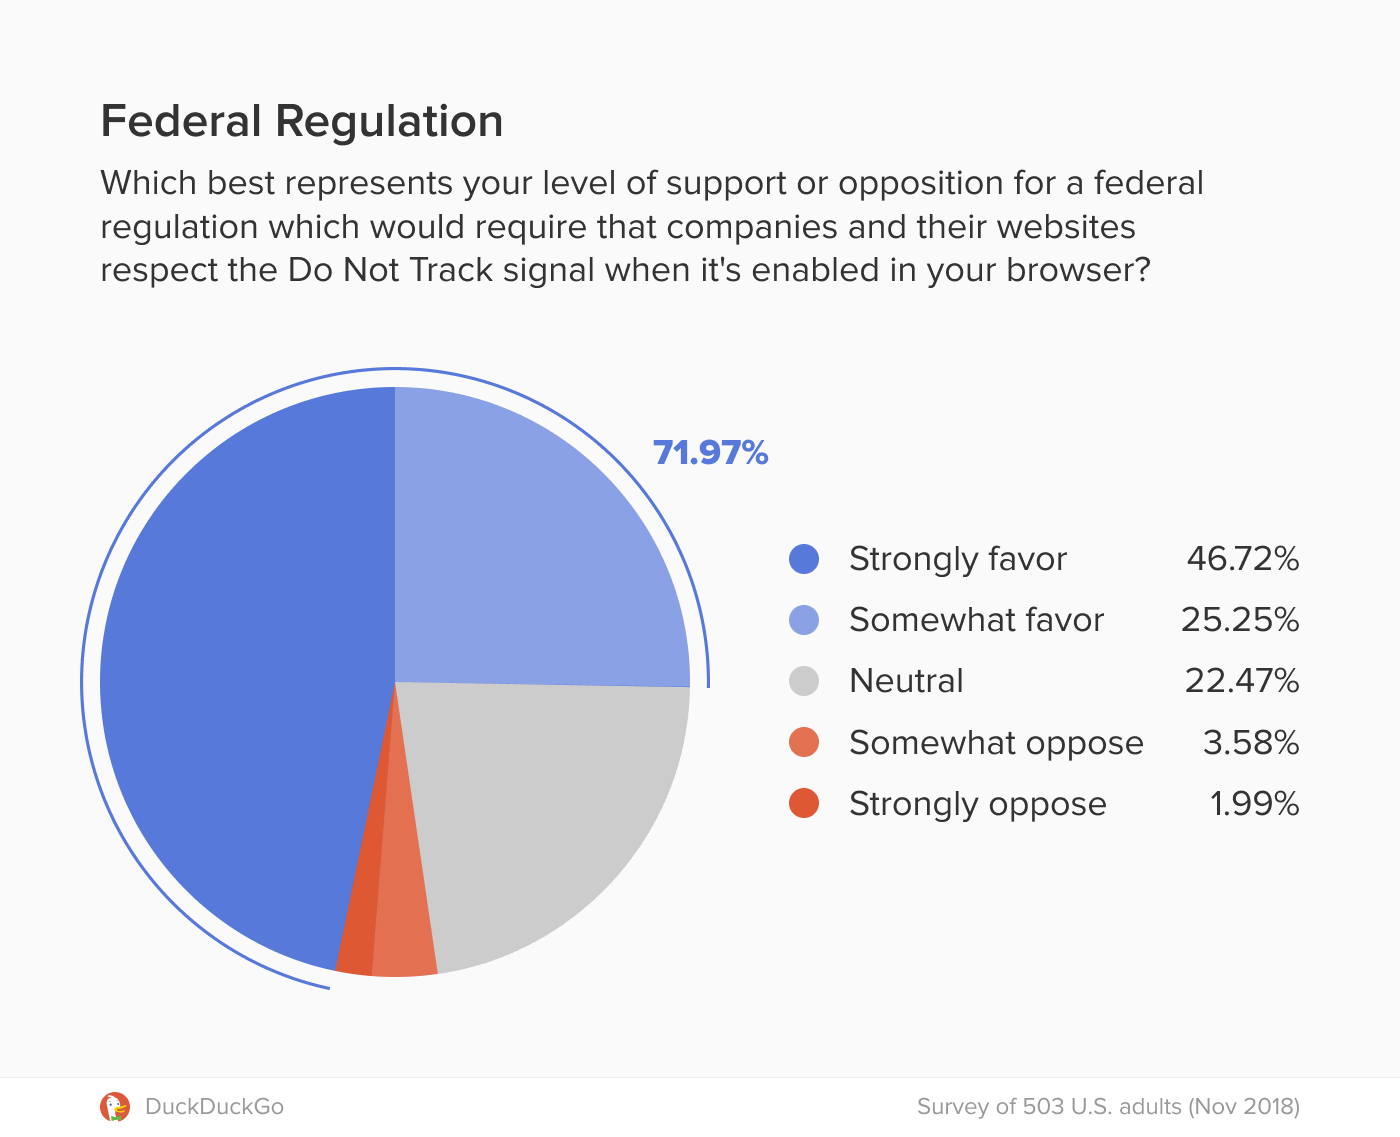 Pie chart showing 71.9 percent of respondents would favor federal regulation requiring companies and their websites to respect the Do Not Track signal when enabled.